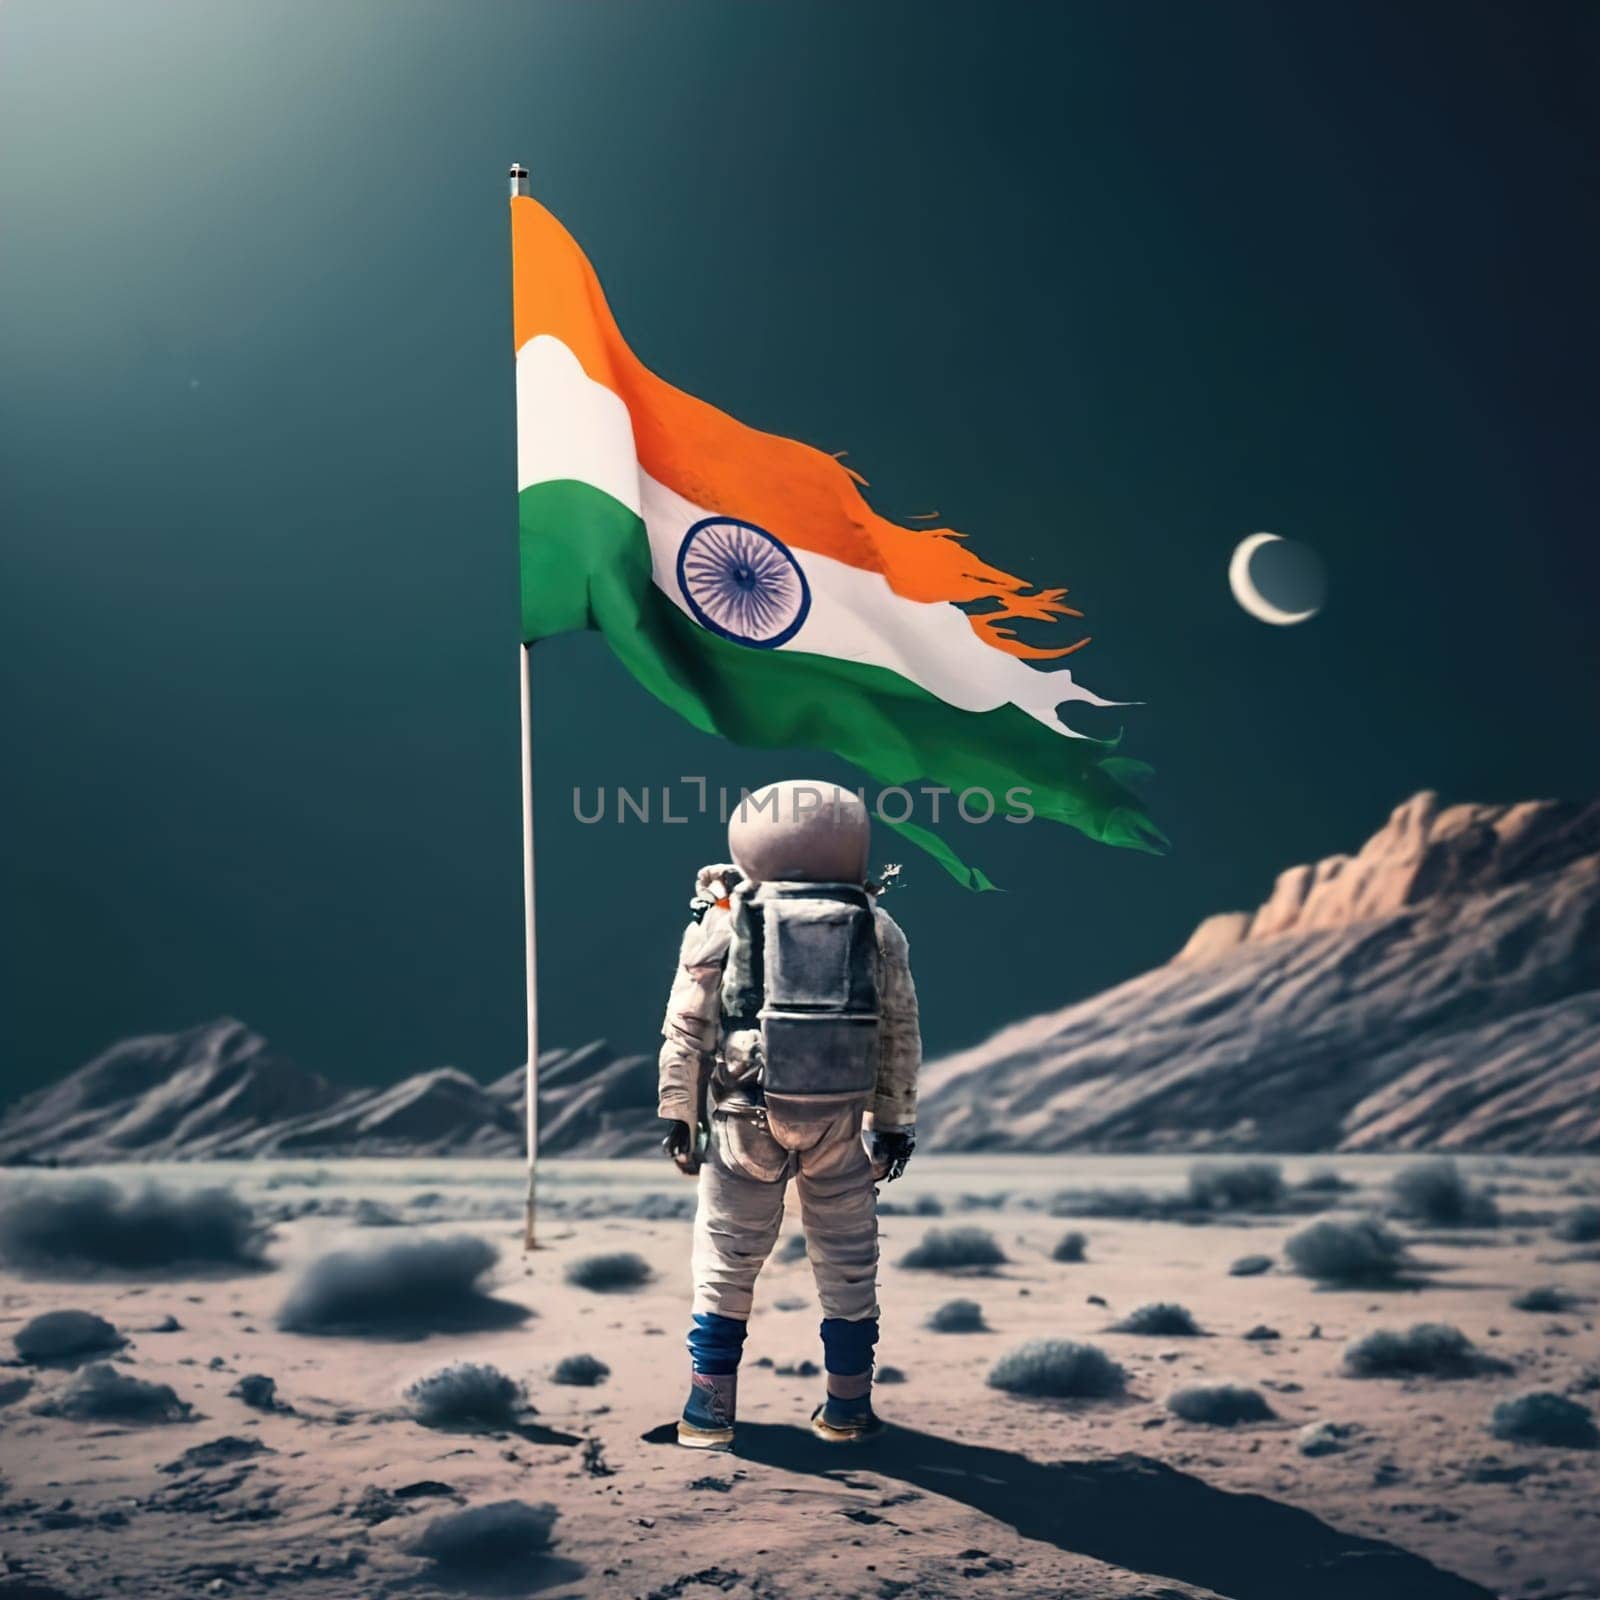 Astronaut on the Moon with the Indian Flag download image